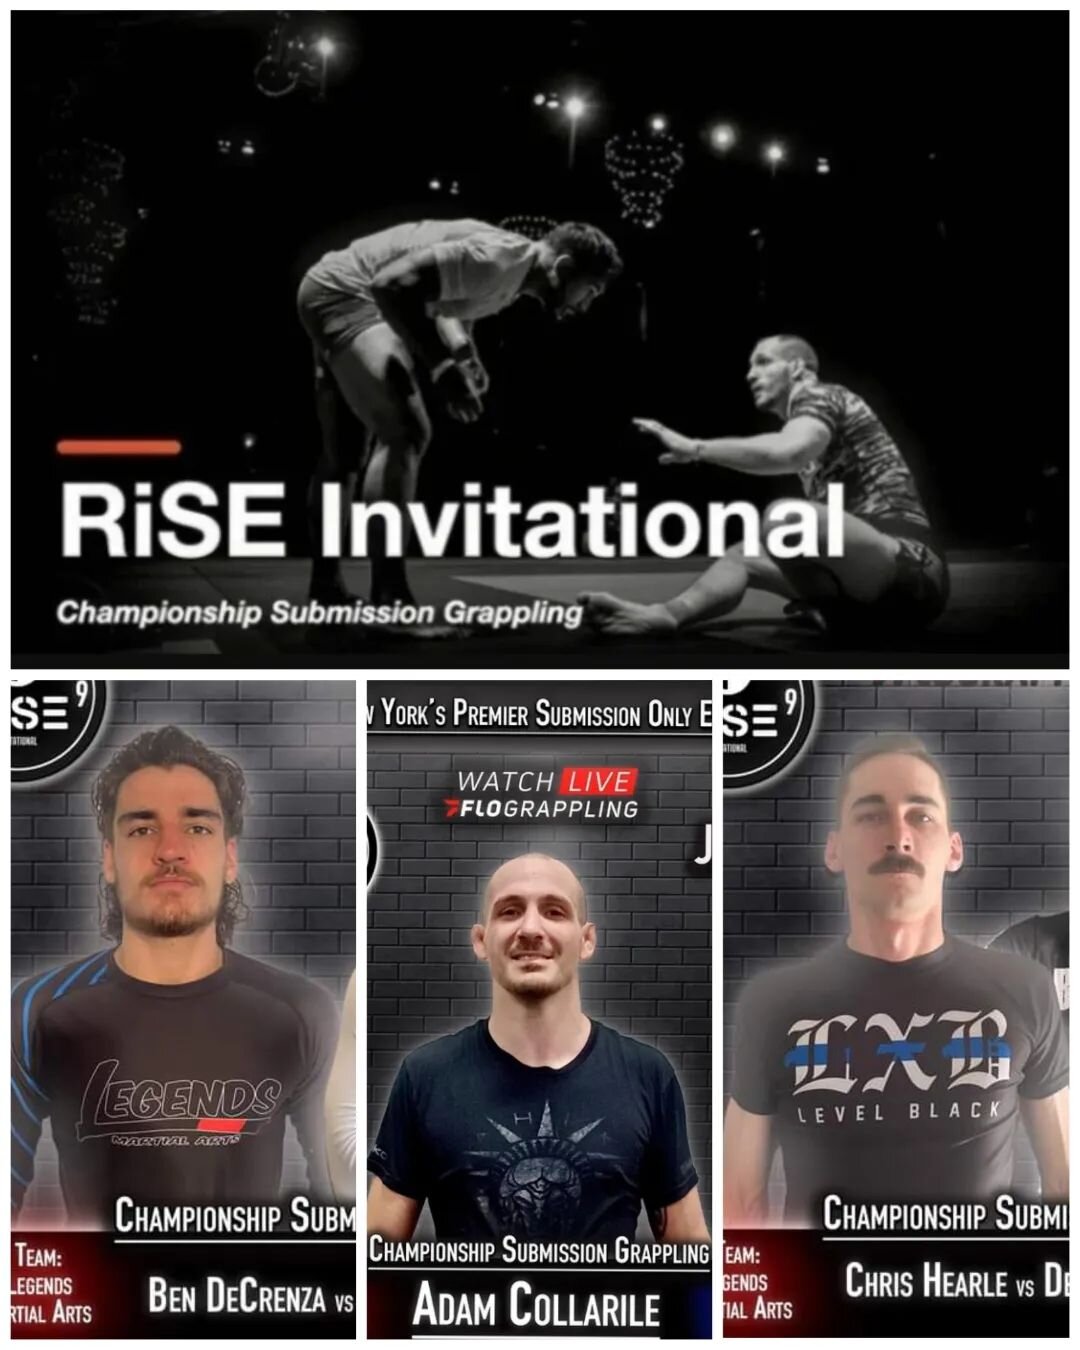 The @riseinvitational is BACK and our team is geared up to put on a show ! ! ! 🏴&zwj;☠️
&bull;
Catch  @c_hearle @bdecrenza @adam__b0mb and tons more talent tomorrow night - LIVE at @spaceatwestbury or tune in to @flograppling.
&bull;
We have only a 